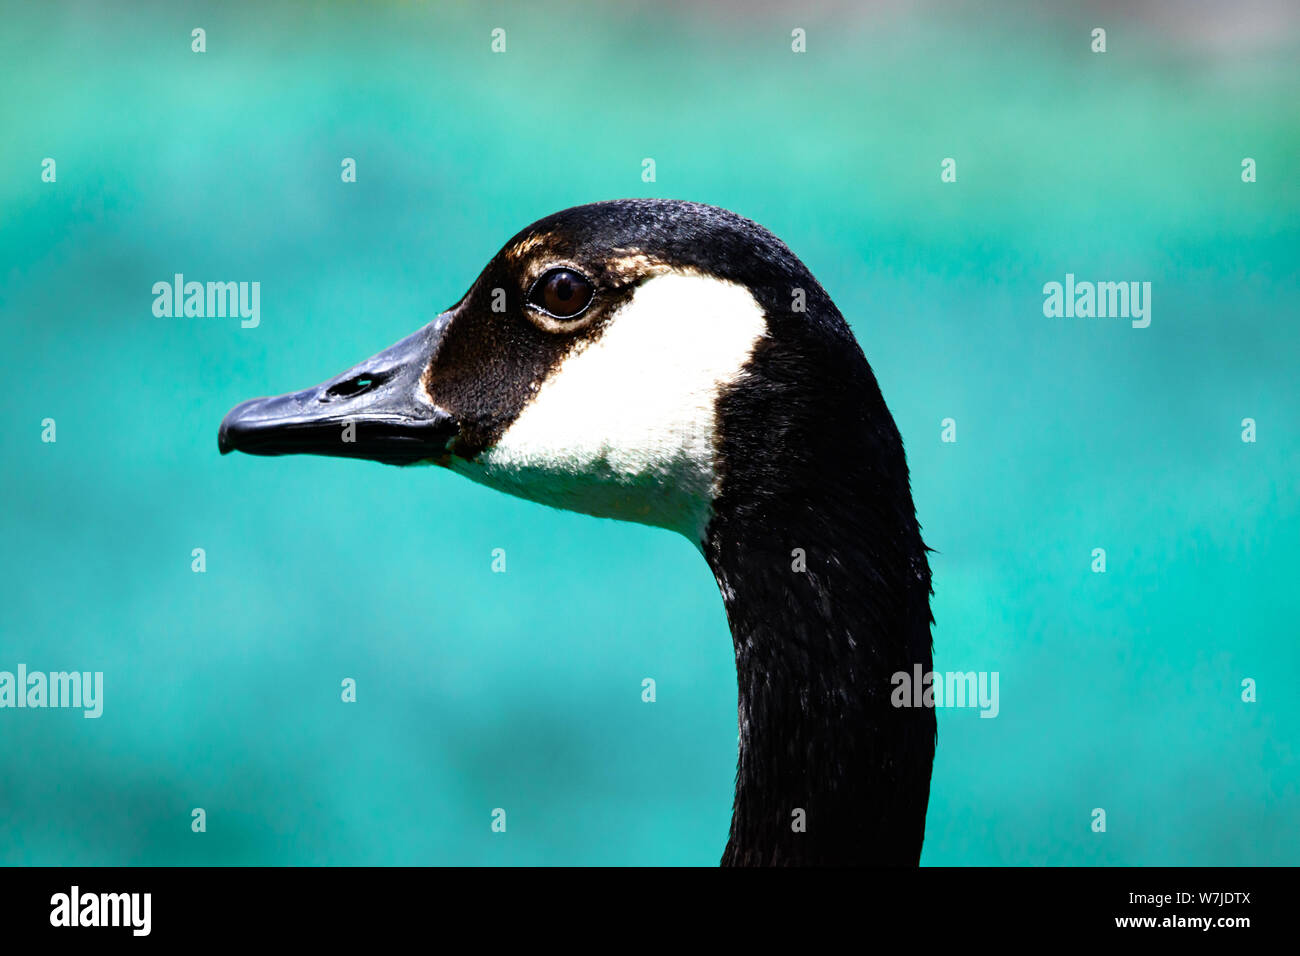 Closeup Portrait of Canada Goose by Water in Bright Daylight Stock Photo